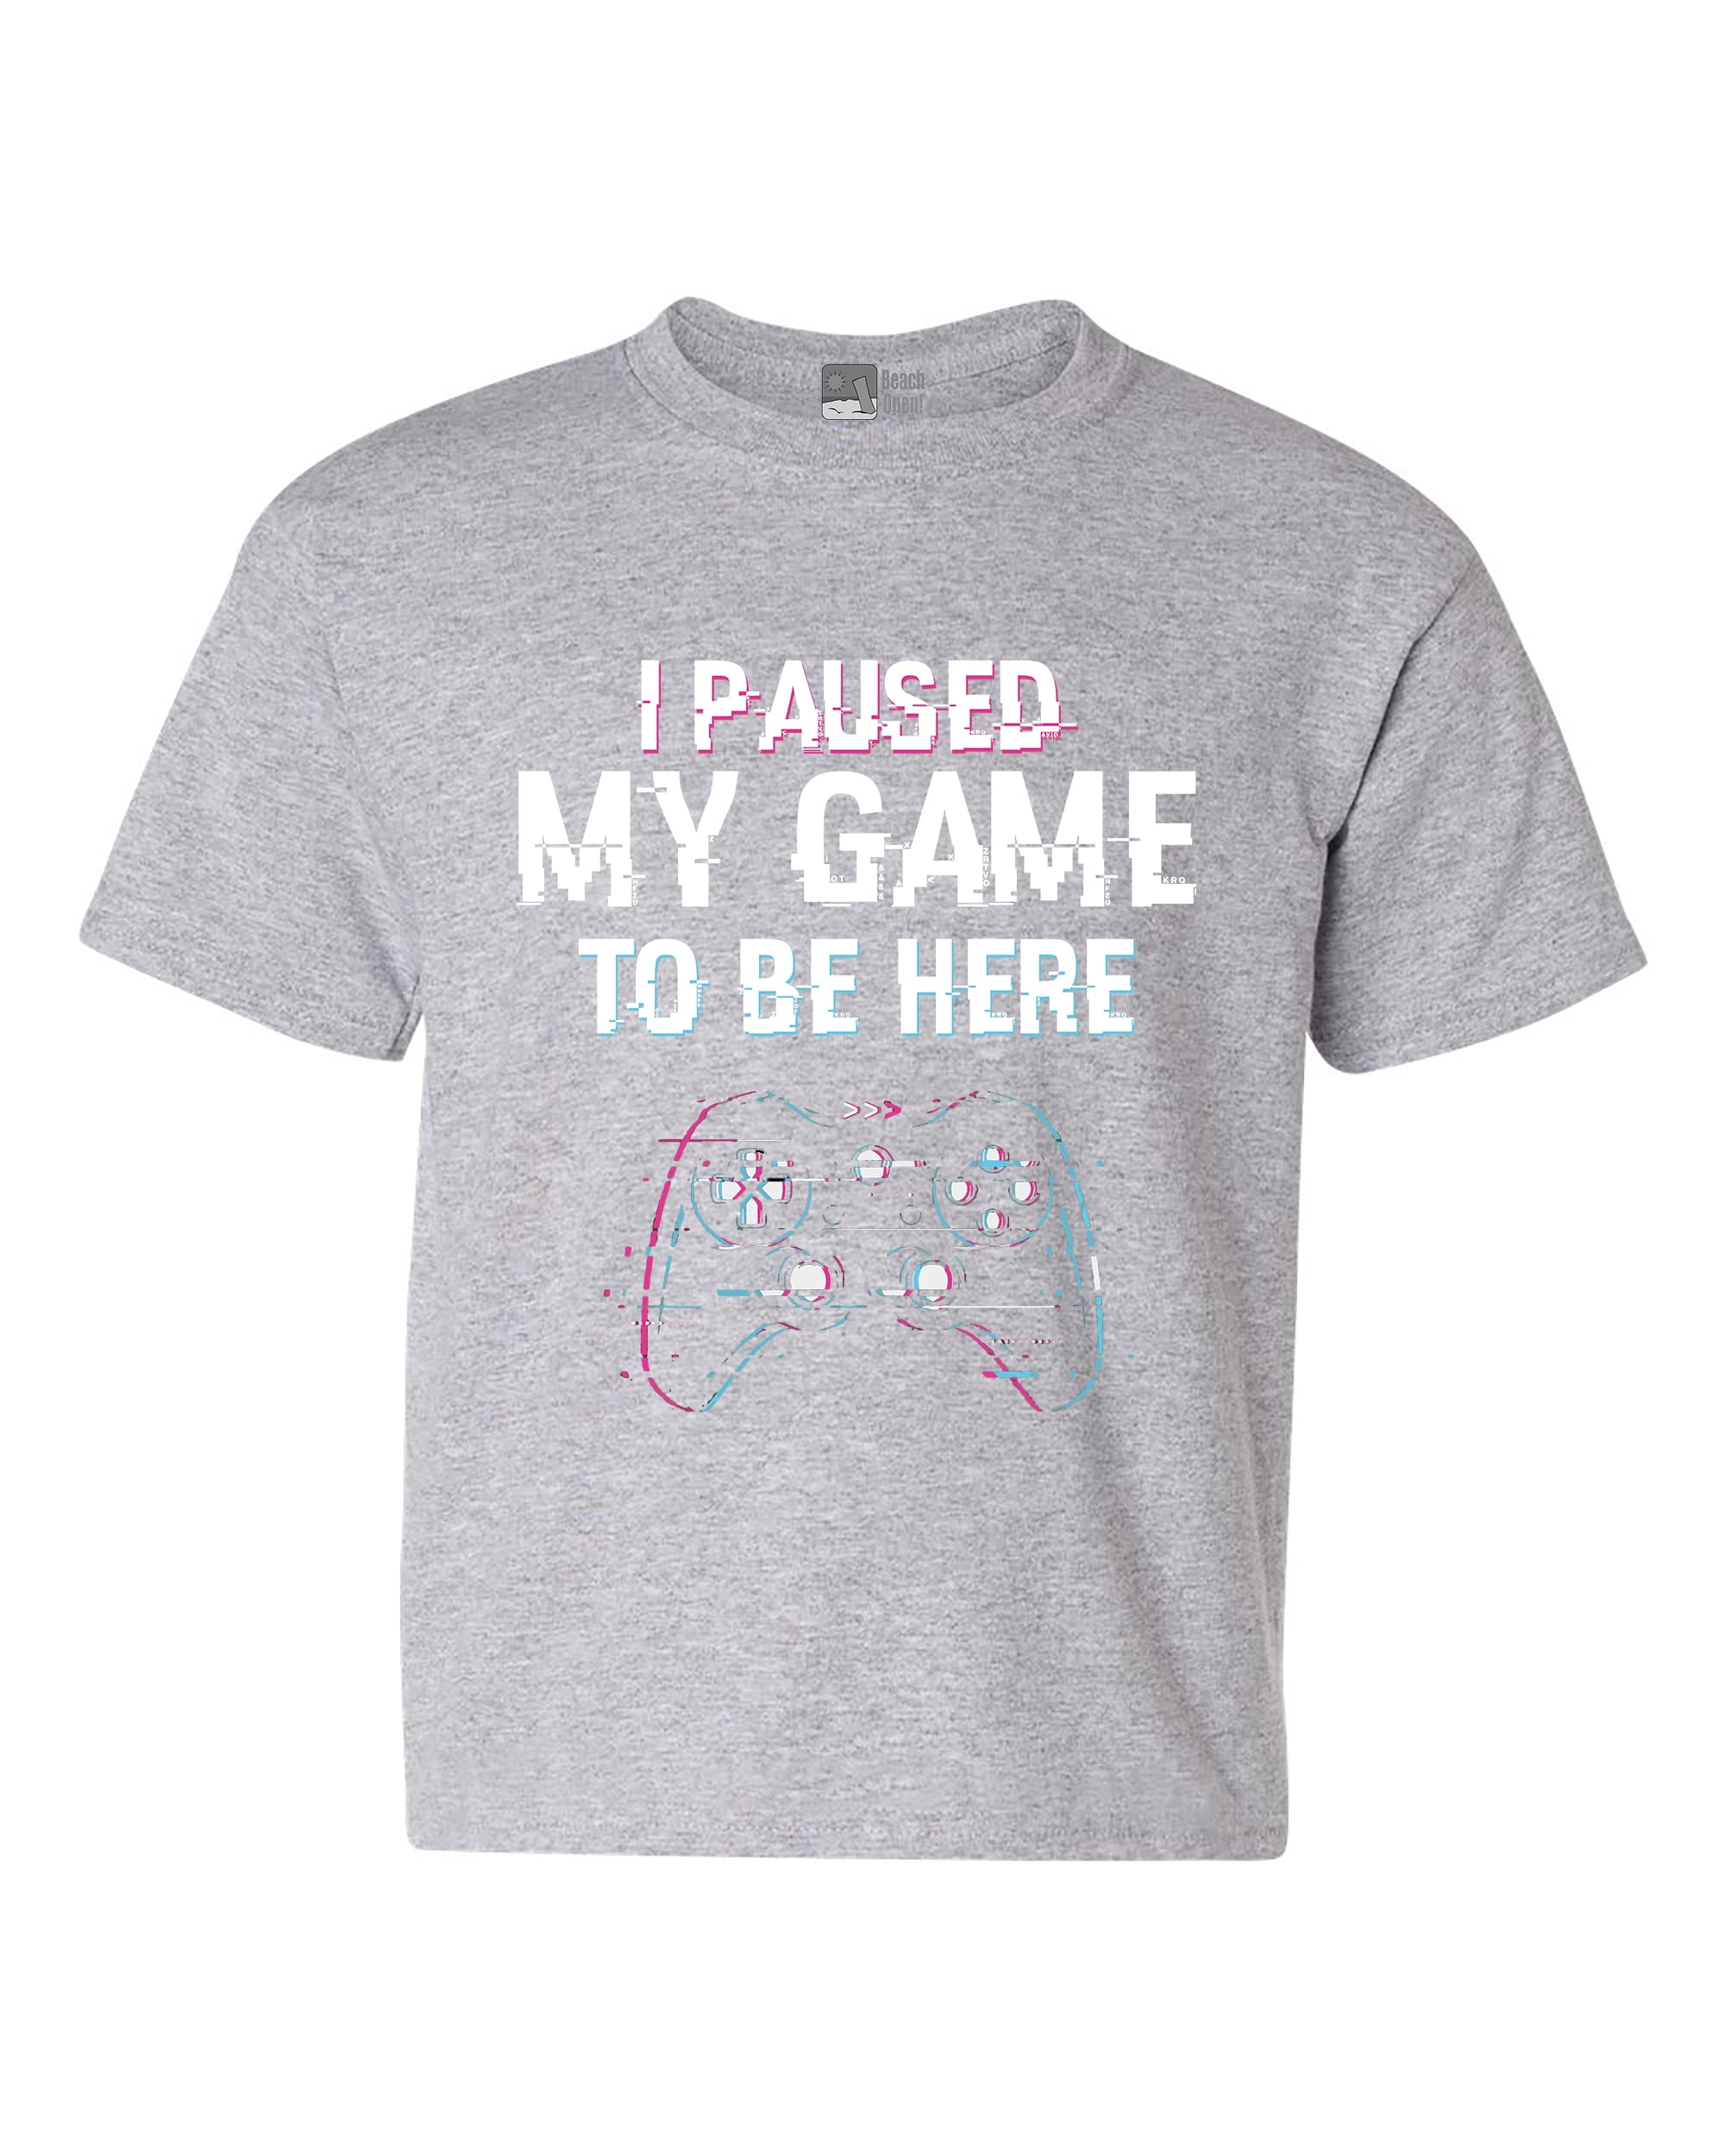 I Paused My Game To Be here Video Games Funny DT Youth Kids T-Shirt Tee -  